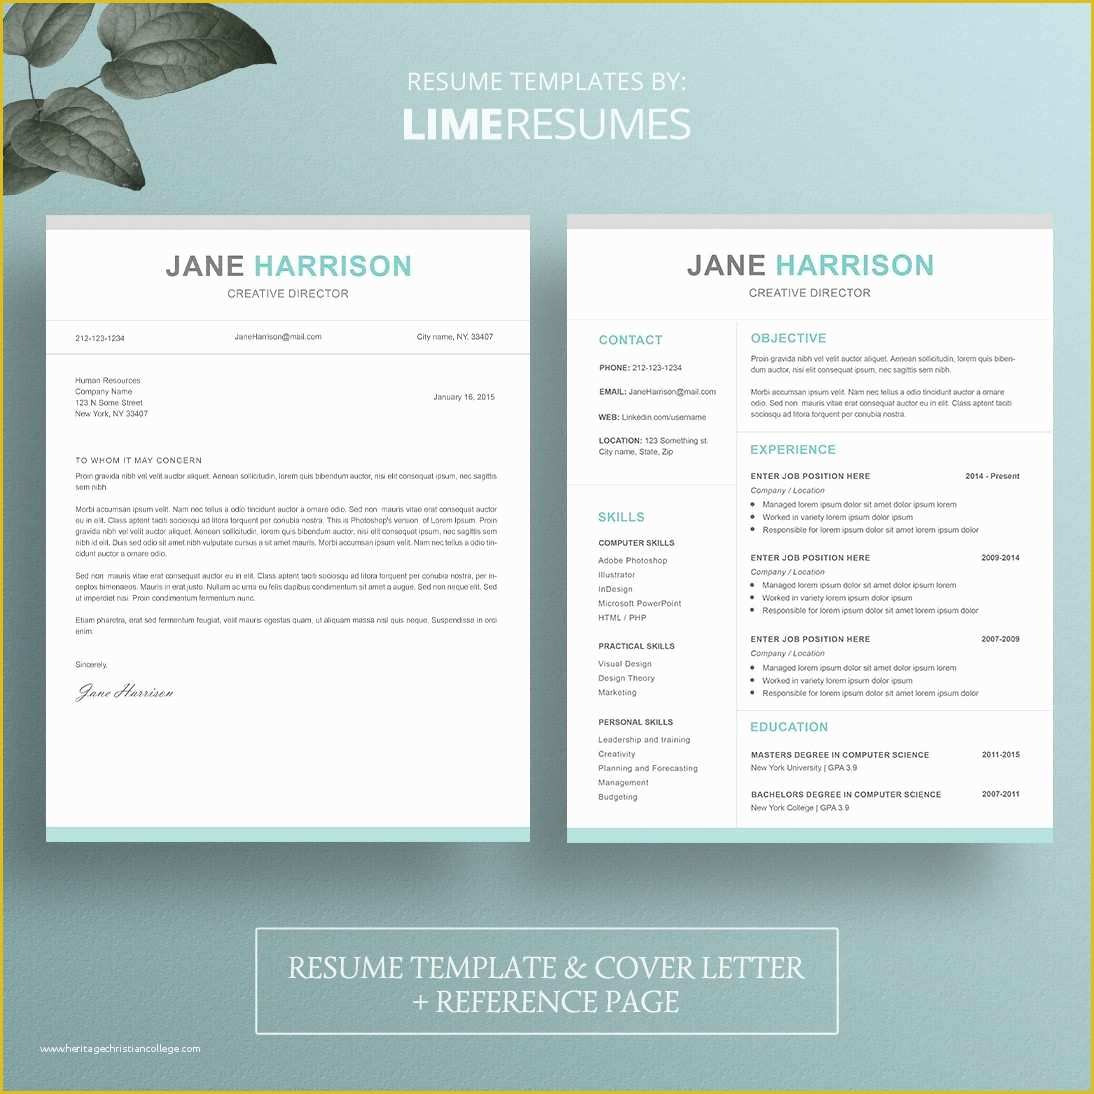 Creative Resume Templates Free Download Word Of Creative Resume Templates Free Download for Microsoft Word